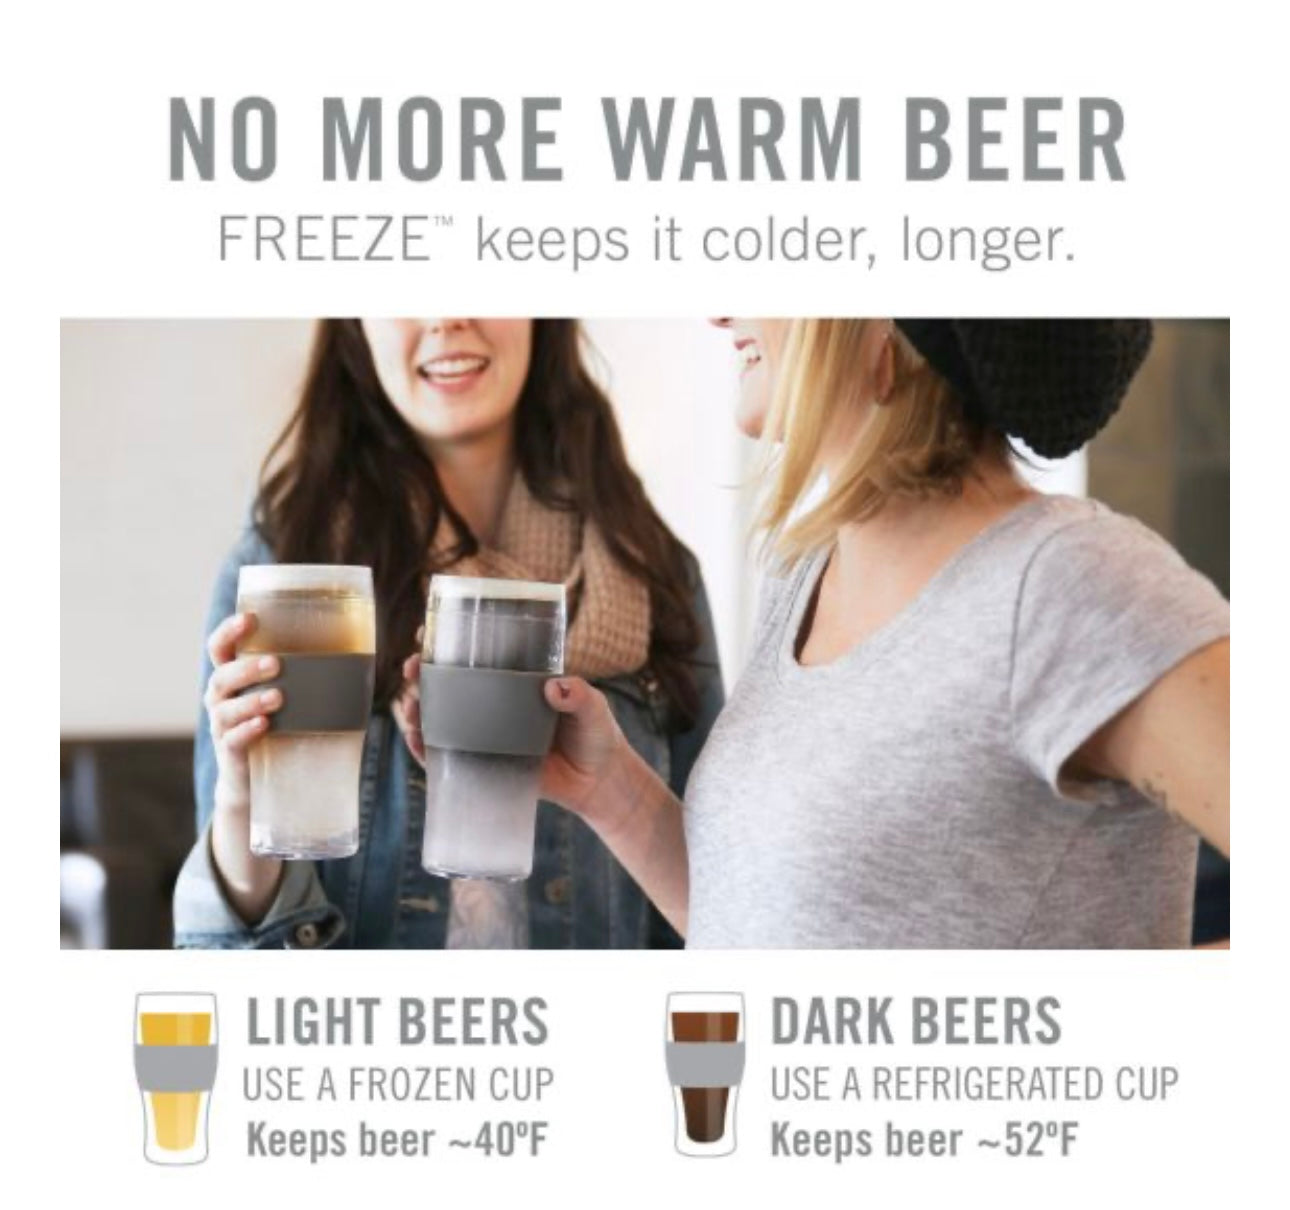 Beer Freeze Cooling Cups Set of 2